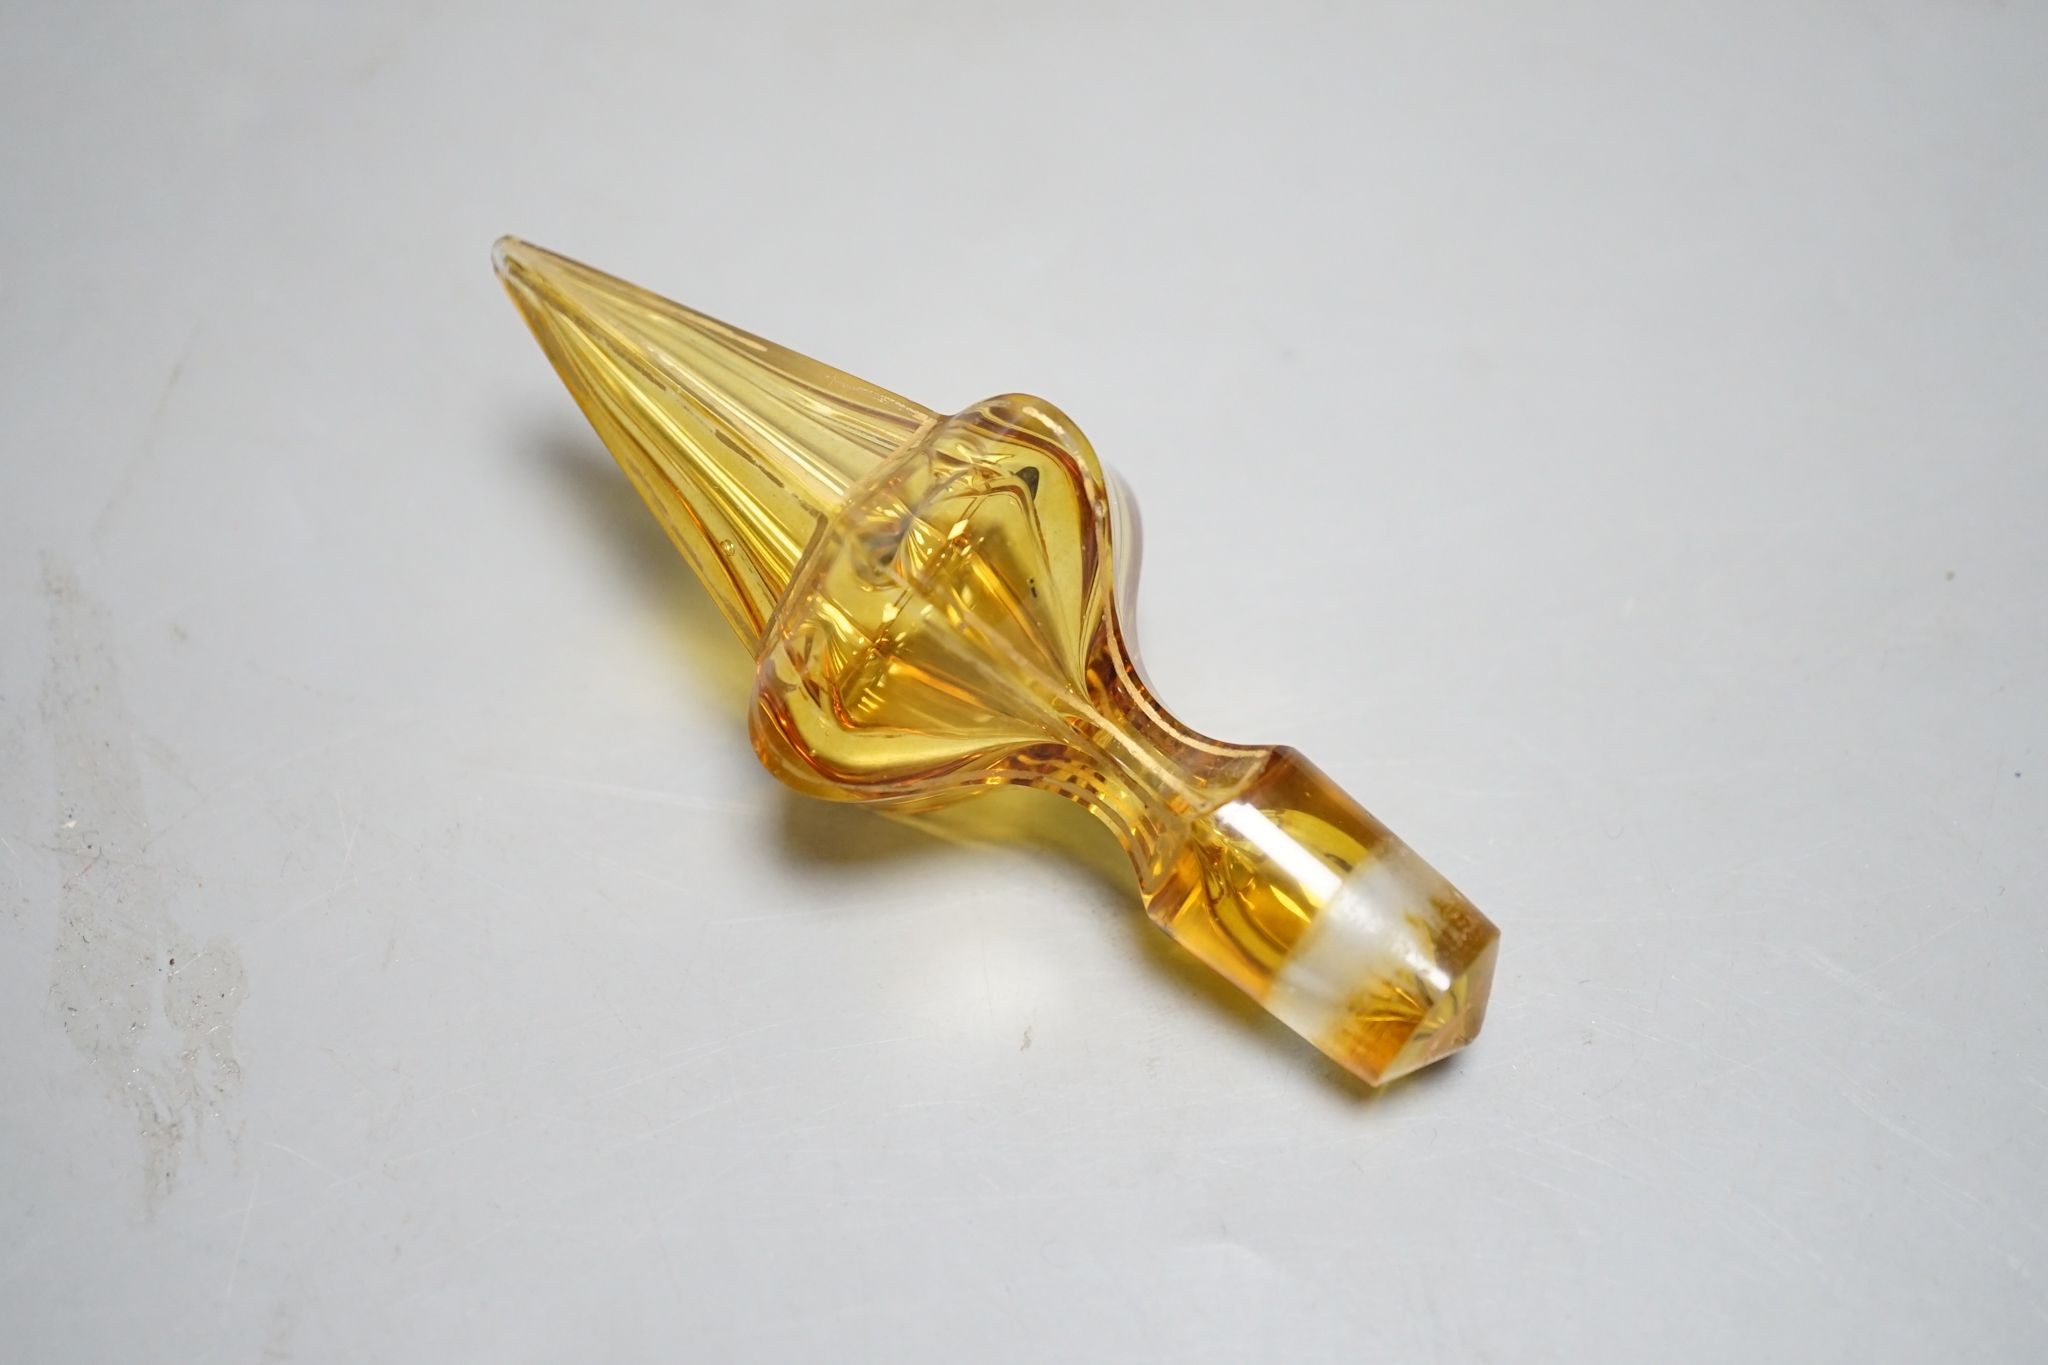 A Bohemian overlaid glass scent bottle, late 19th century, 26 cms high including stopper.